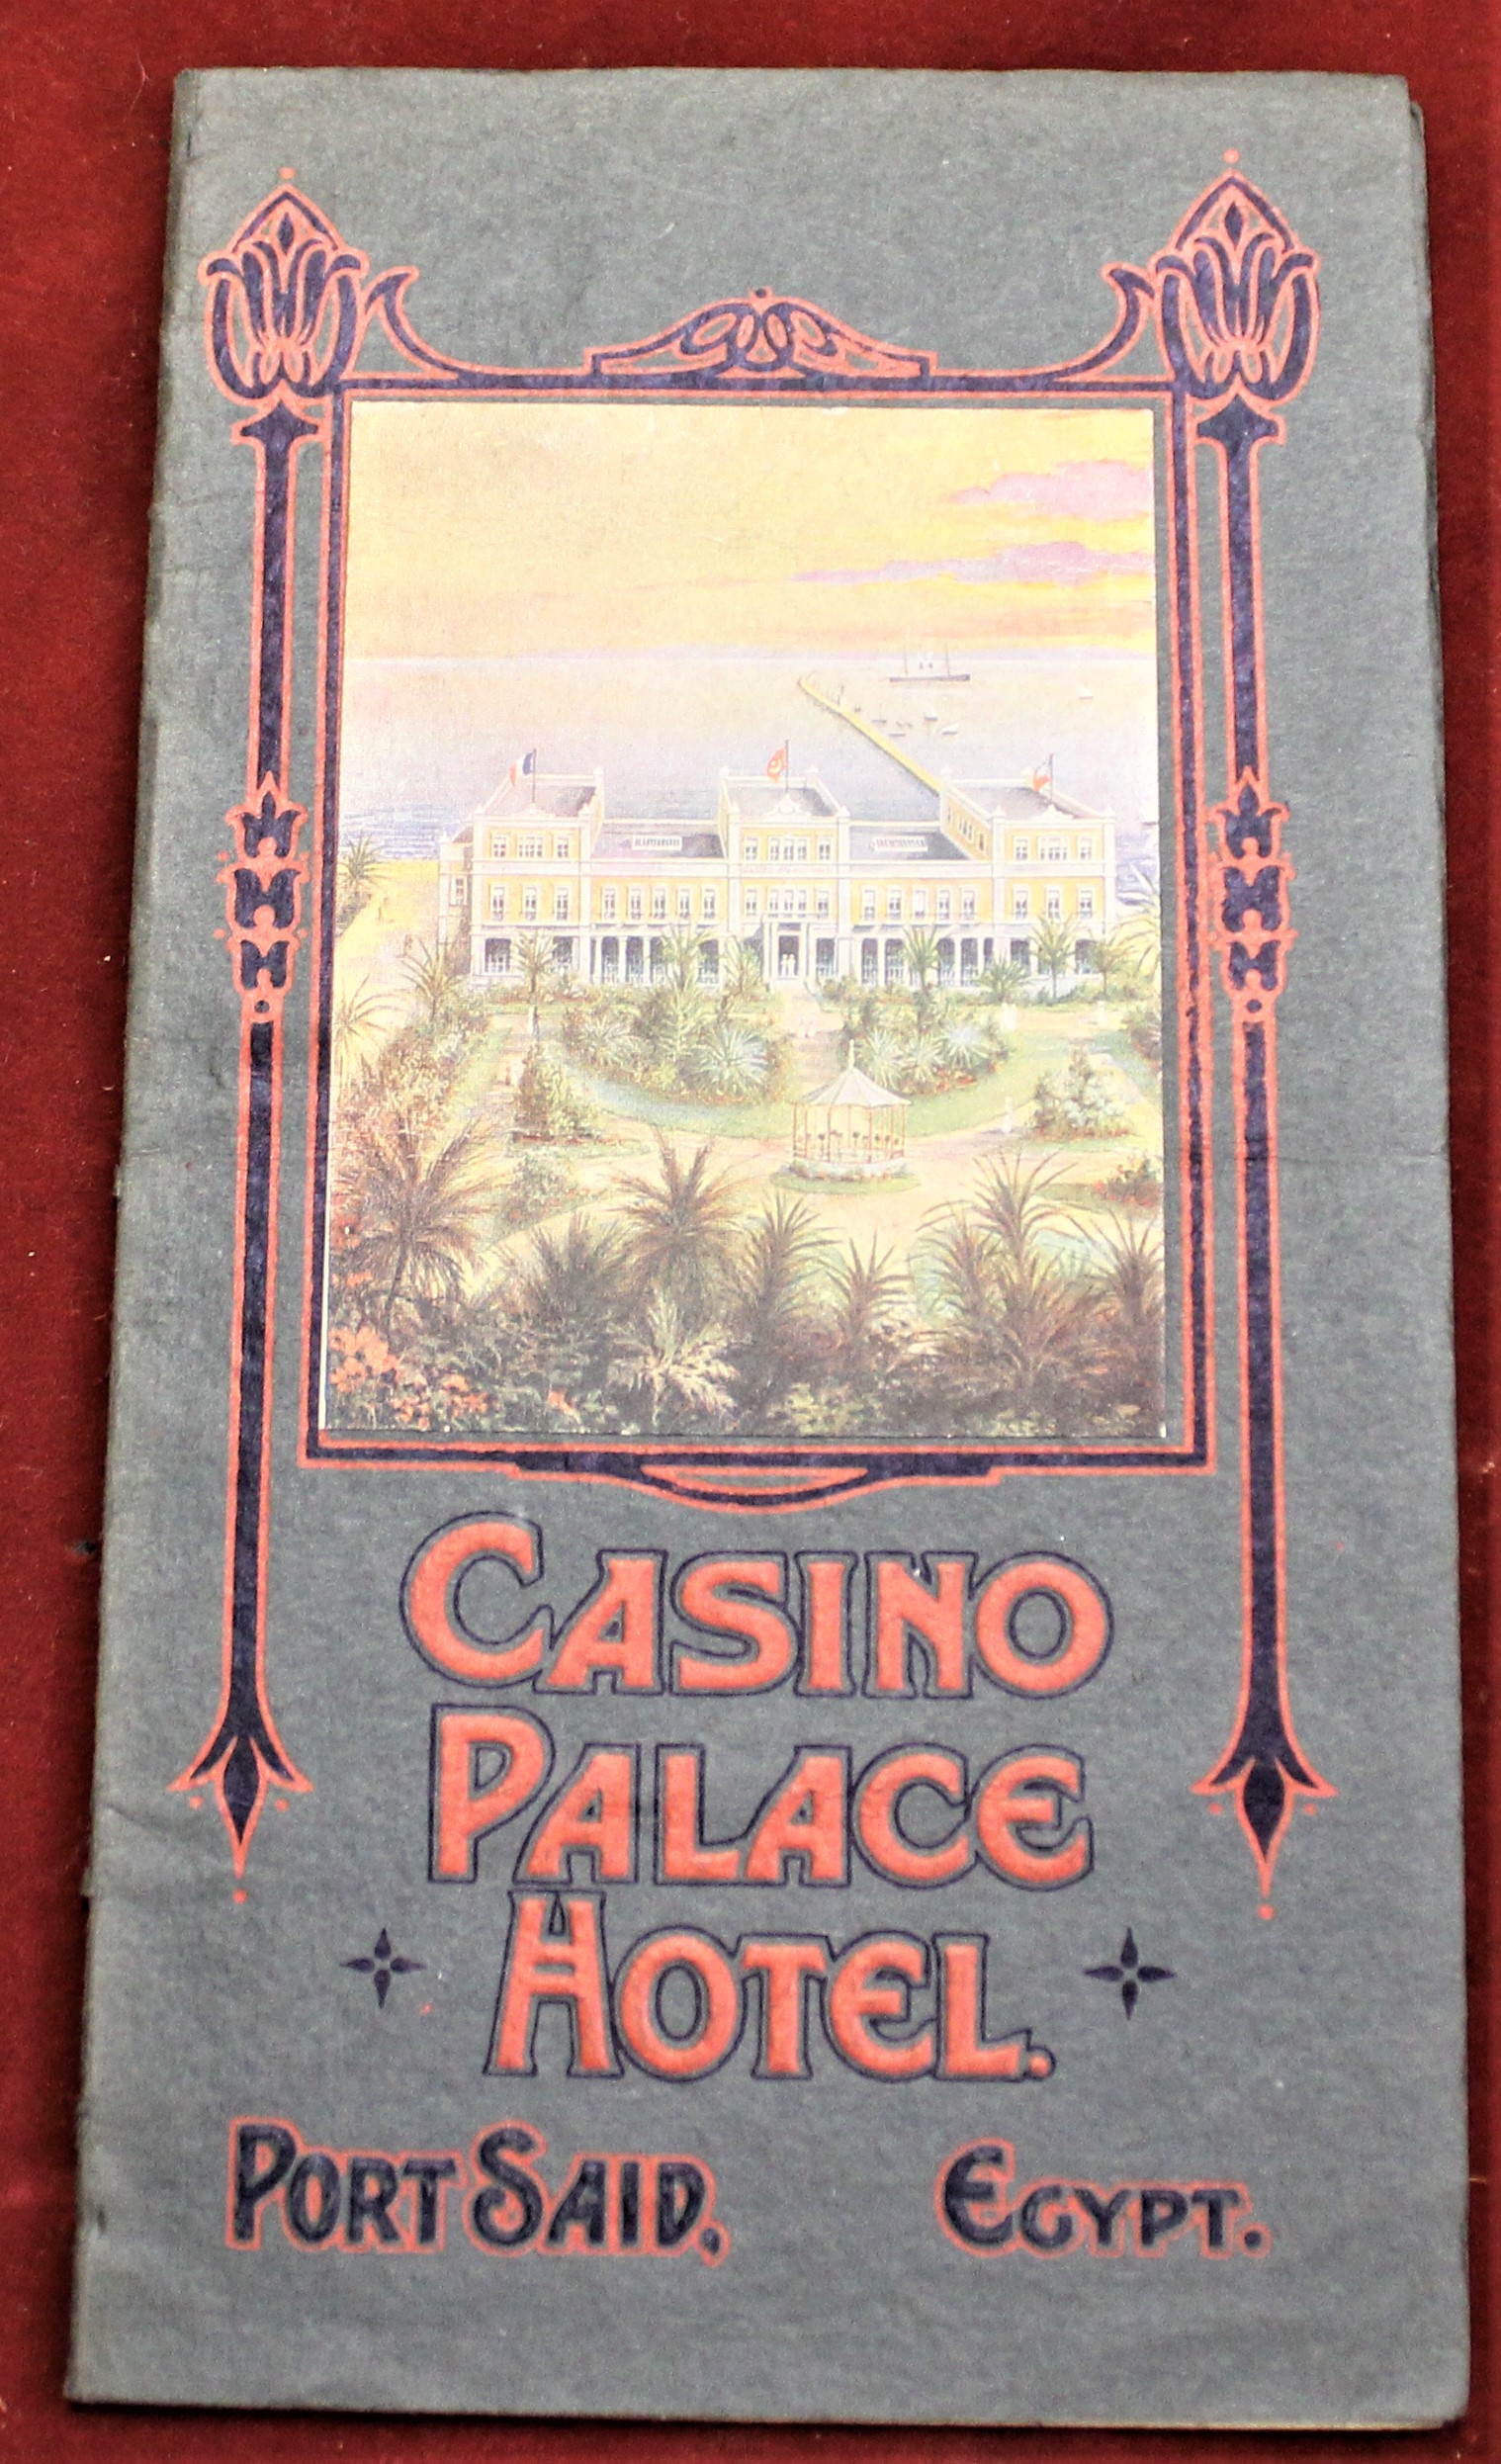 Egypt 1920s Casino Palace Hotel, Port Said 1920s brochure very fine condition. Modern Port Said by